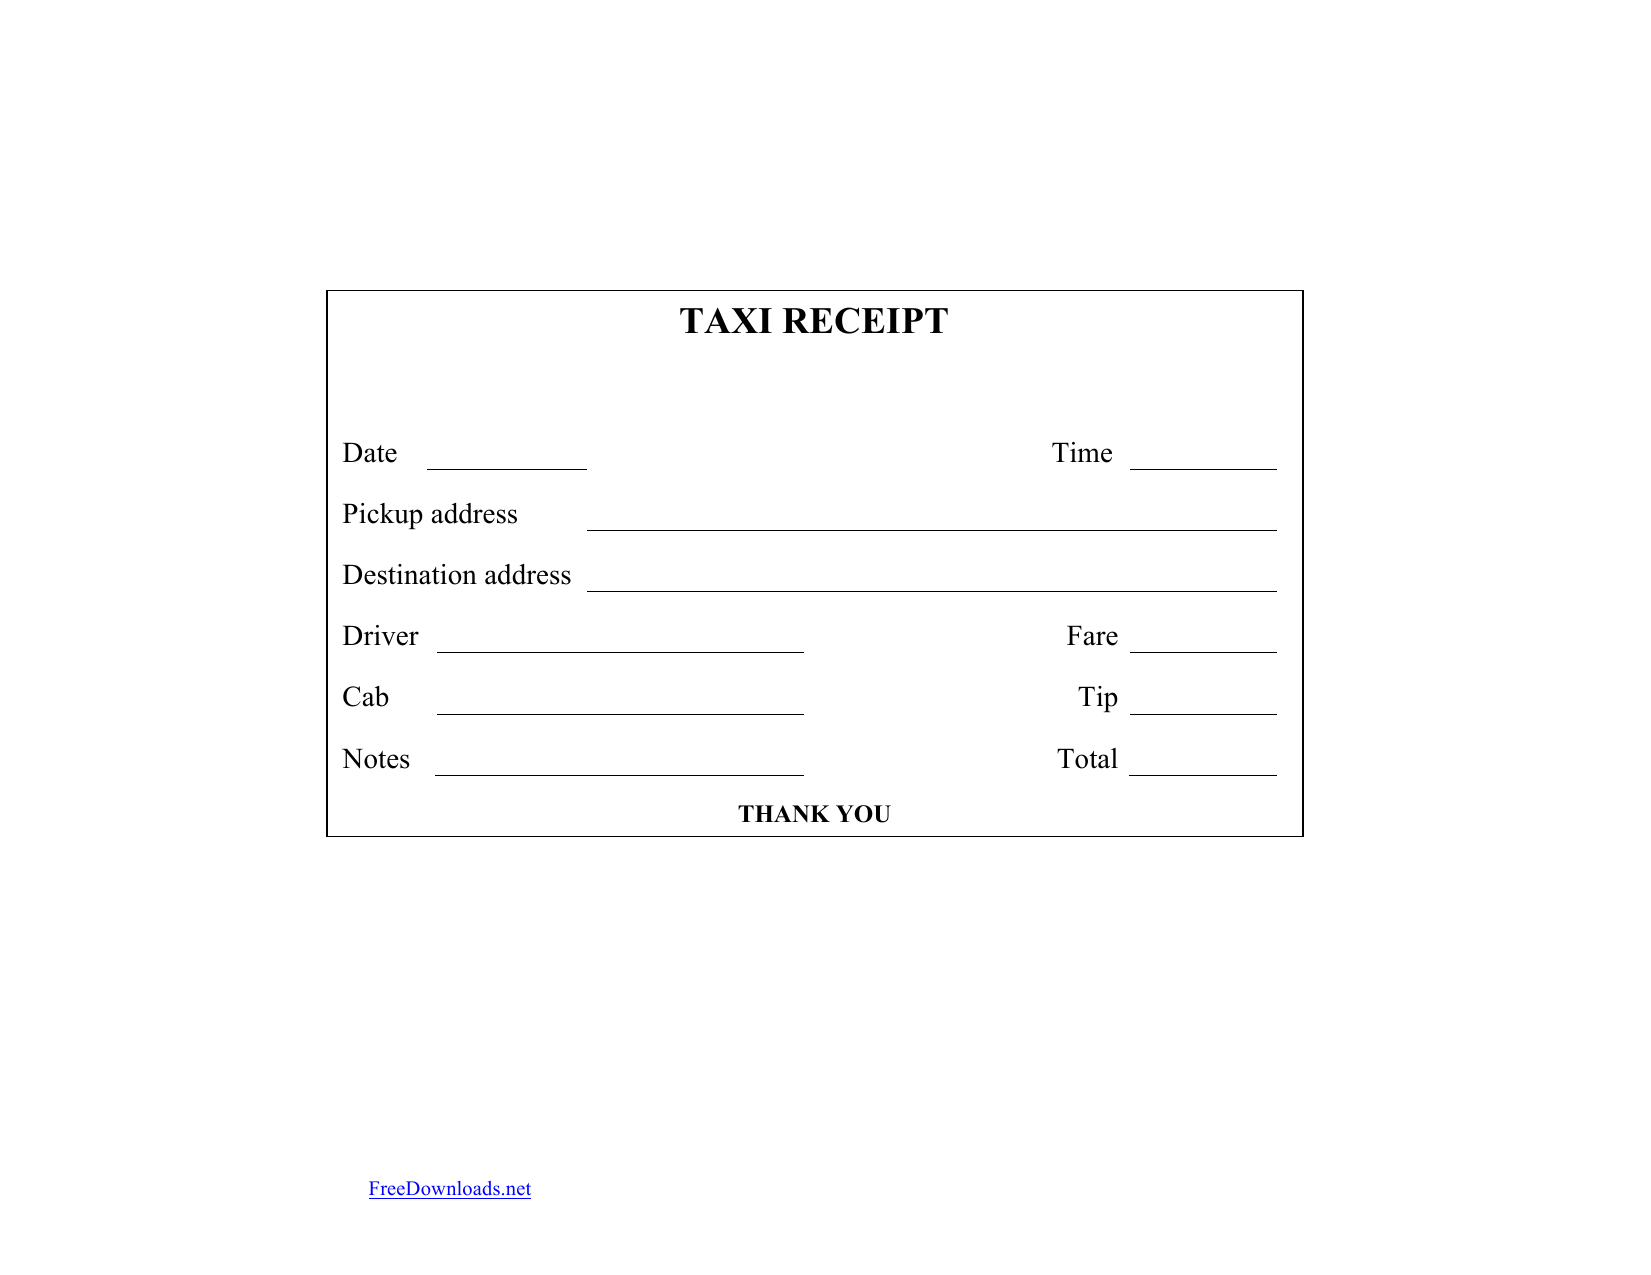 Taxi Receipt Pdf - Dalep.midnightpig.co Pertaining To Blank Taxi Receipt Template